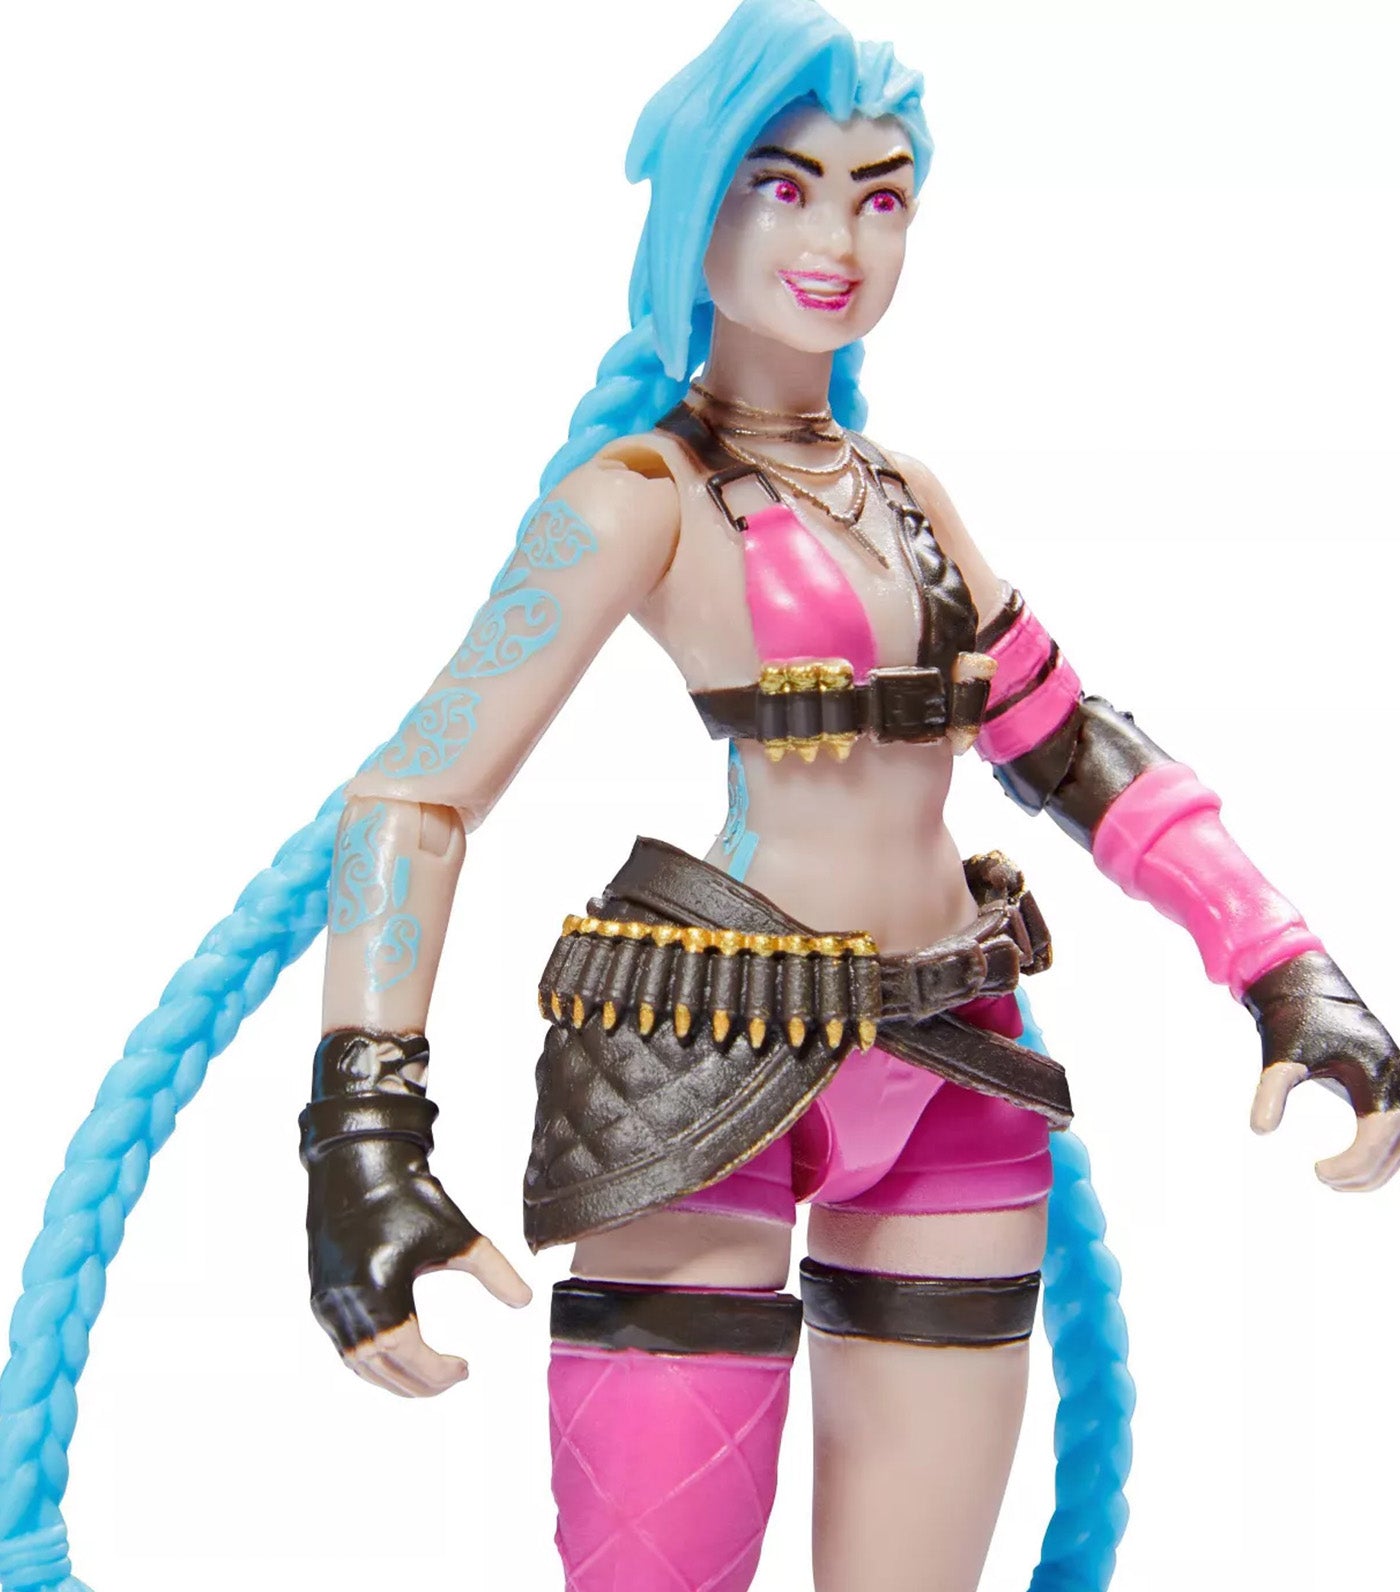 4in Jinx Collectible Figure